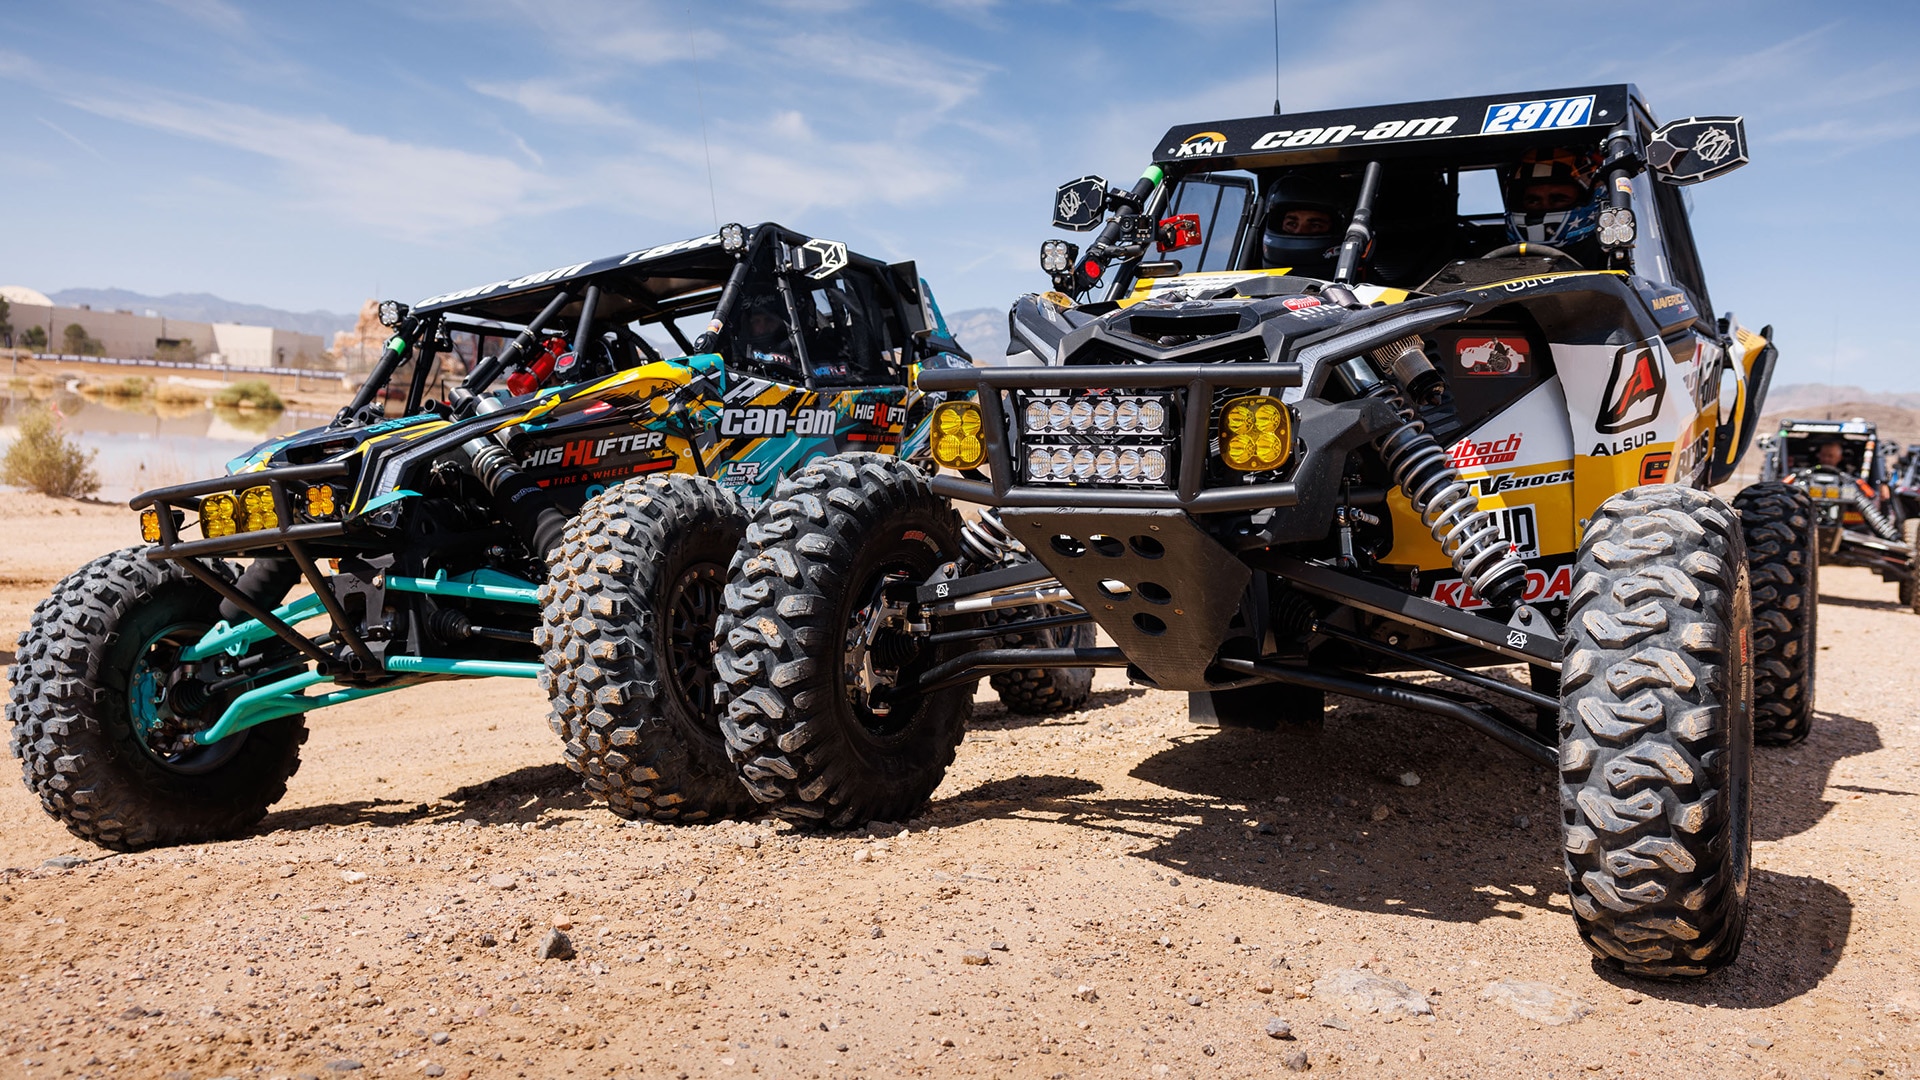 Two Can-Am Off-Road vehicles side by side before the big race